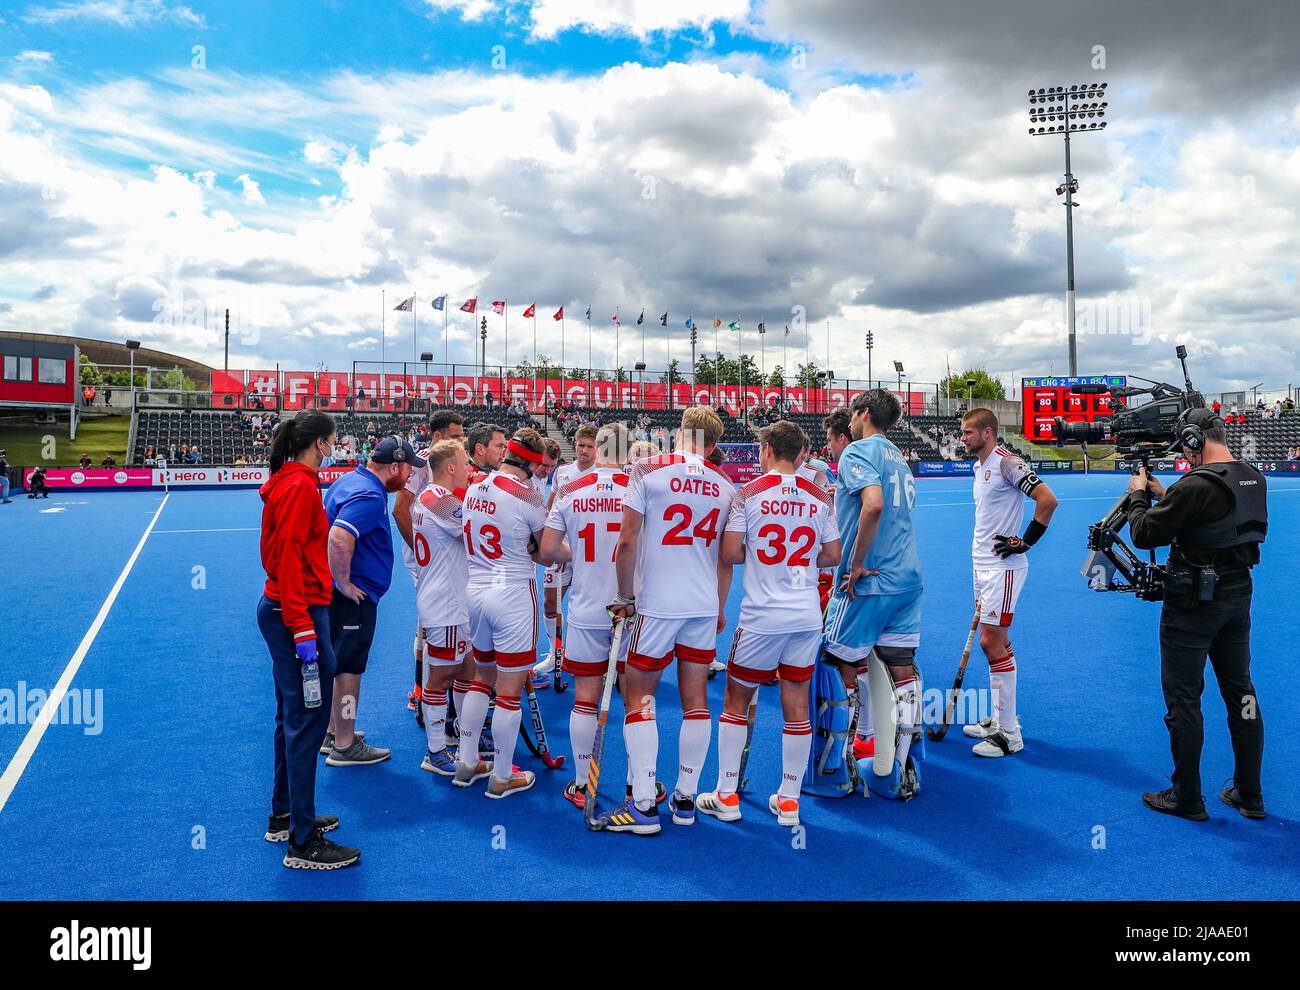 England huddle after the first quater during the FIH Hockey Pro League match at Lee Valley, London. Picture date: Sunday May 29, 2022. See PA story HOCKEY England. Photo credit should read: Bradley Collyer/PA Wire. RESTRICTIONS: Use subject to restrictions. Editorial use only, no commercial use without prior consent from rights holder. Stock Photo